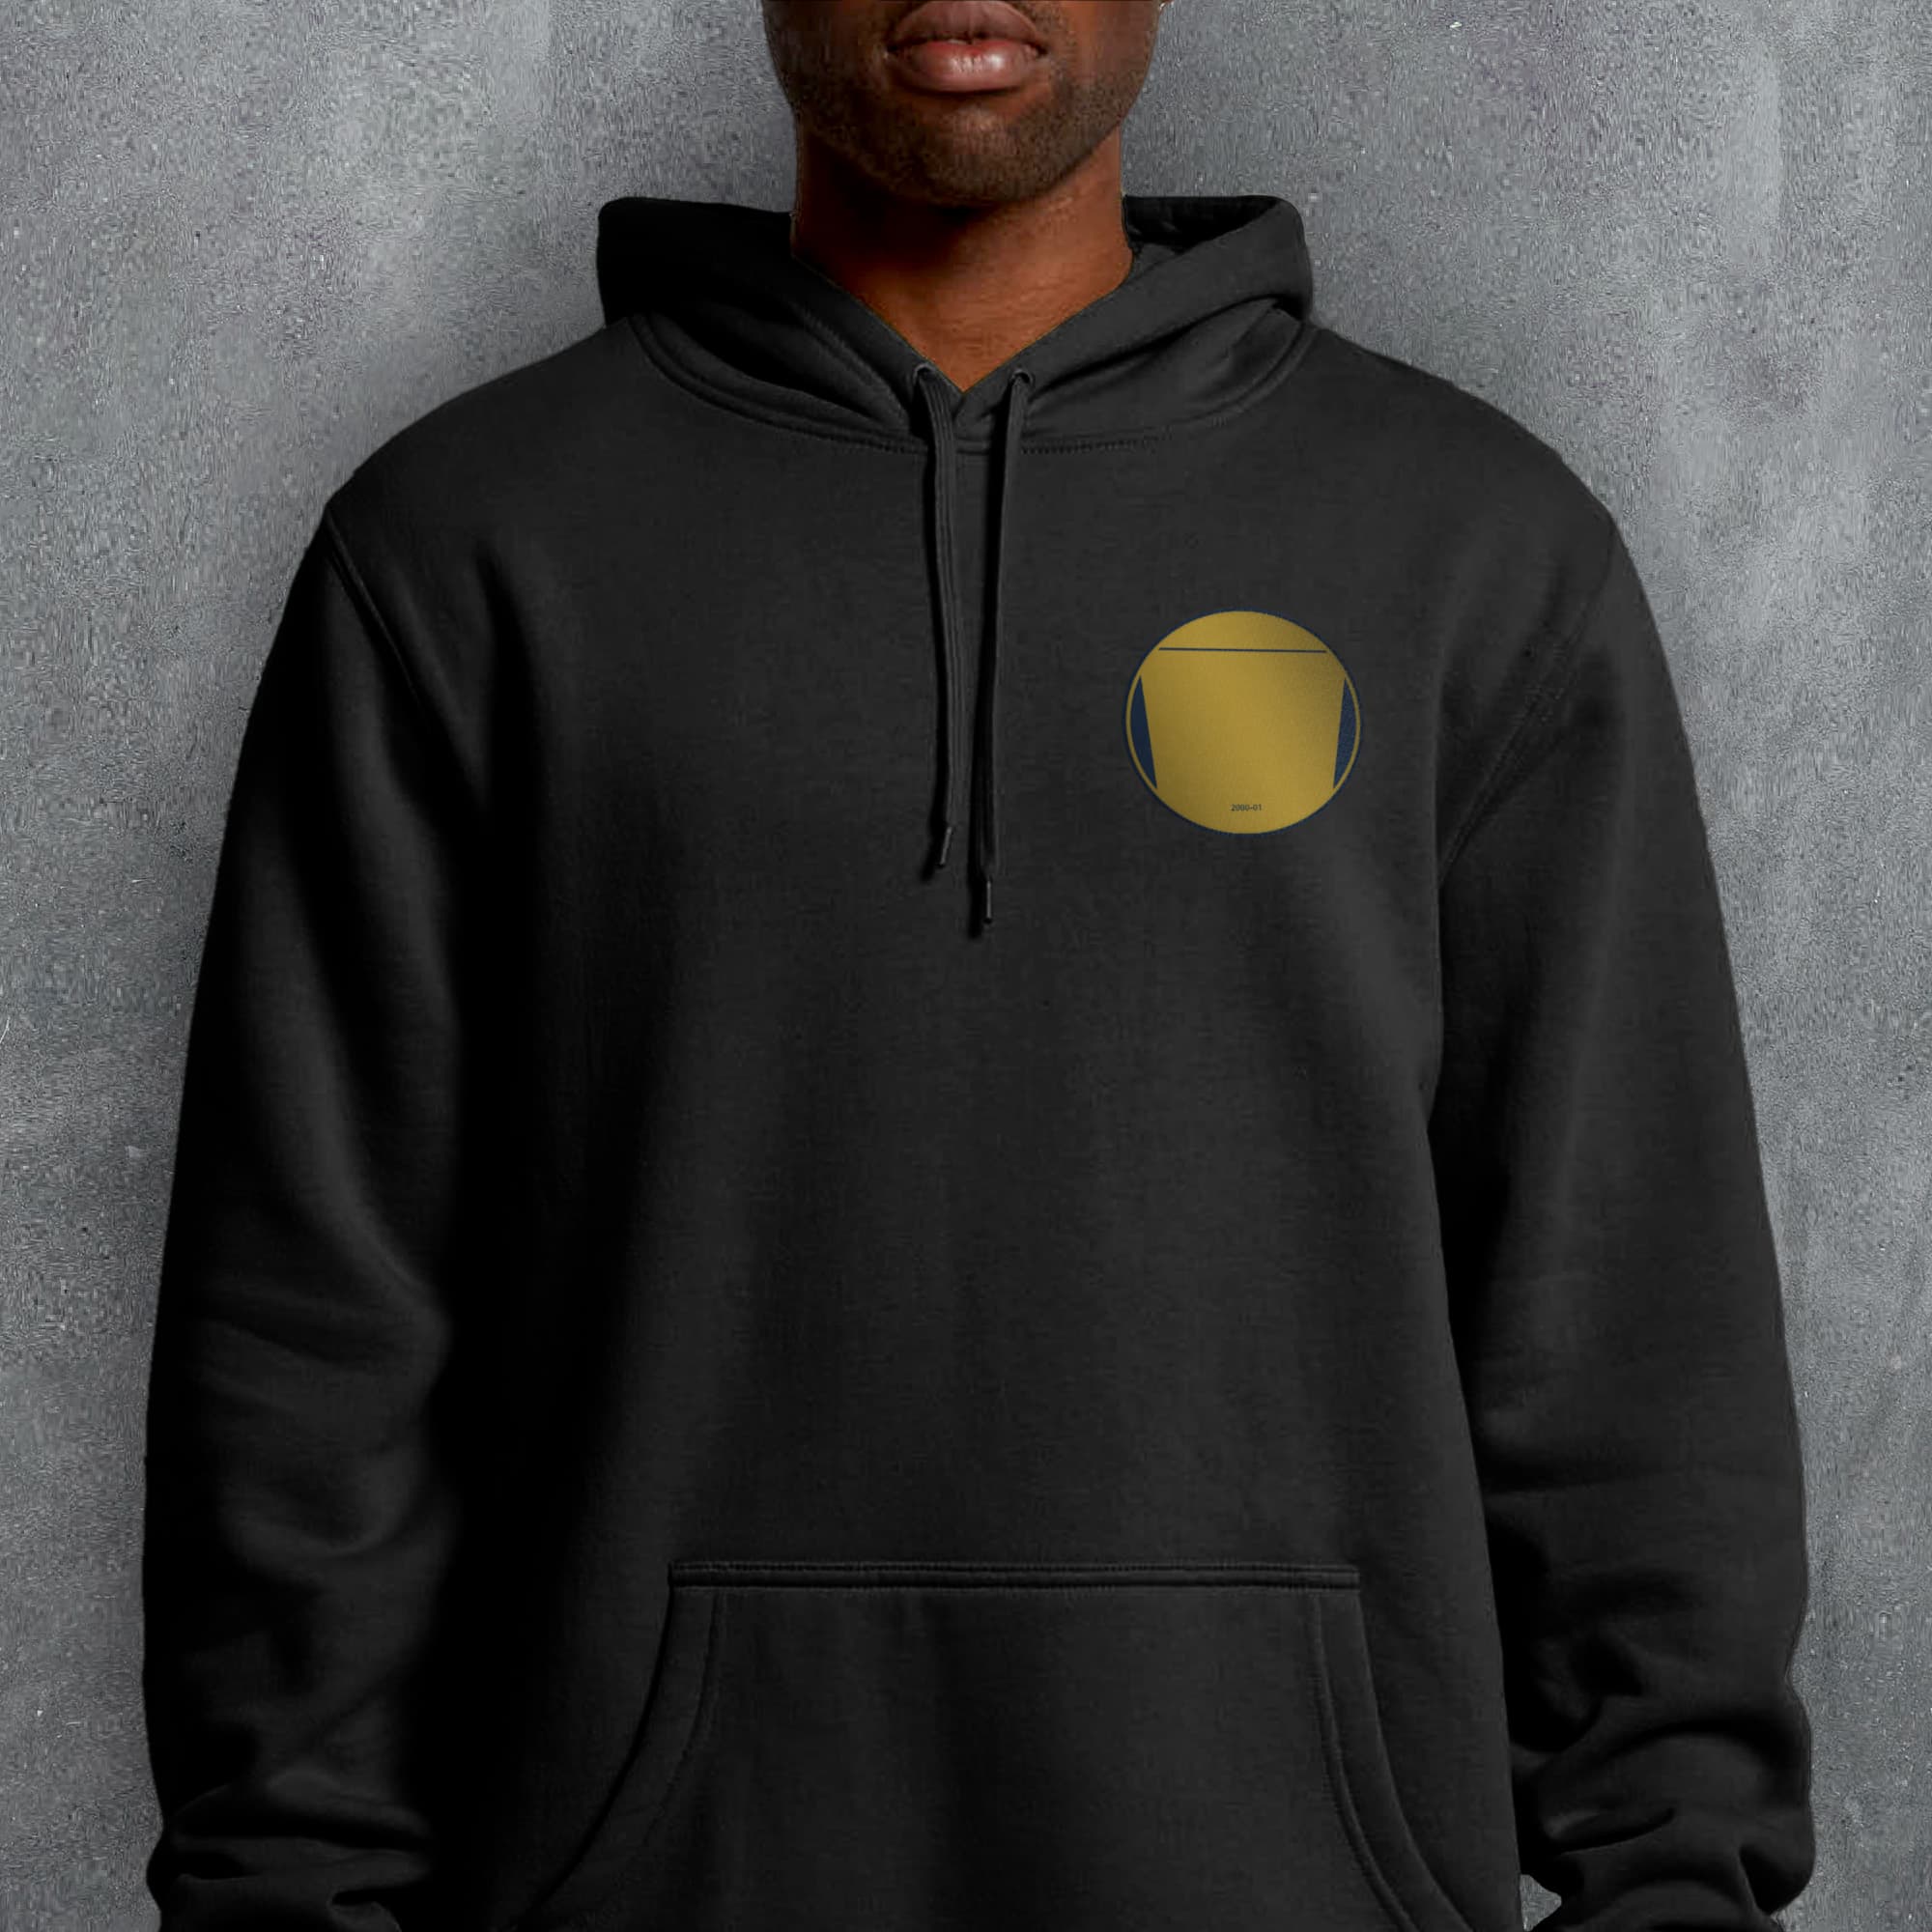 a man wearing a black hoodie with a yellow circle on it